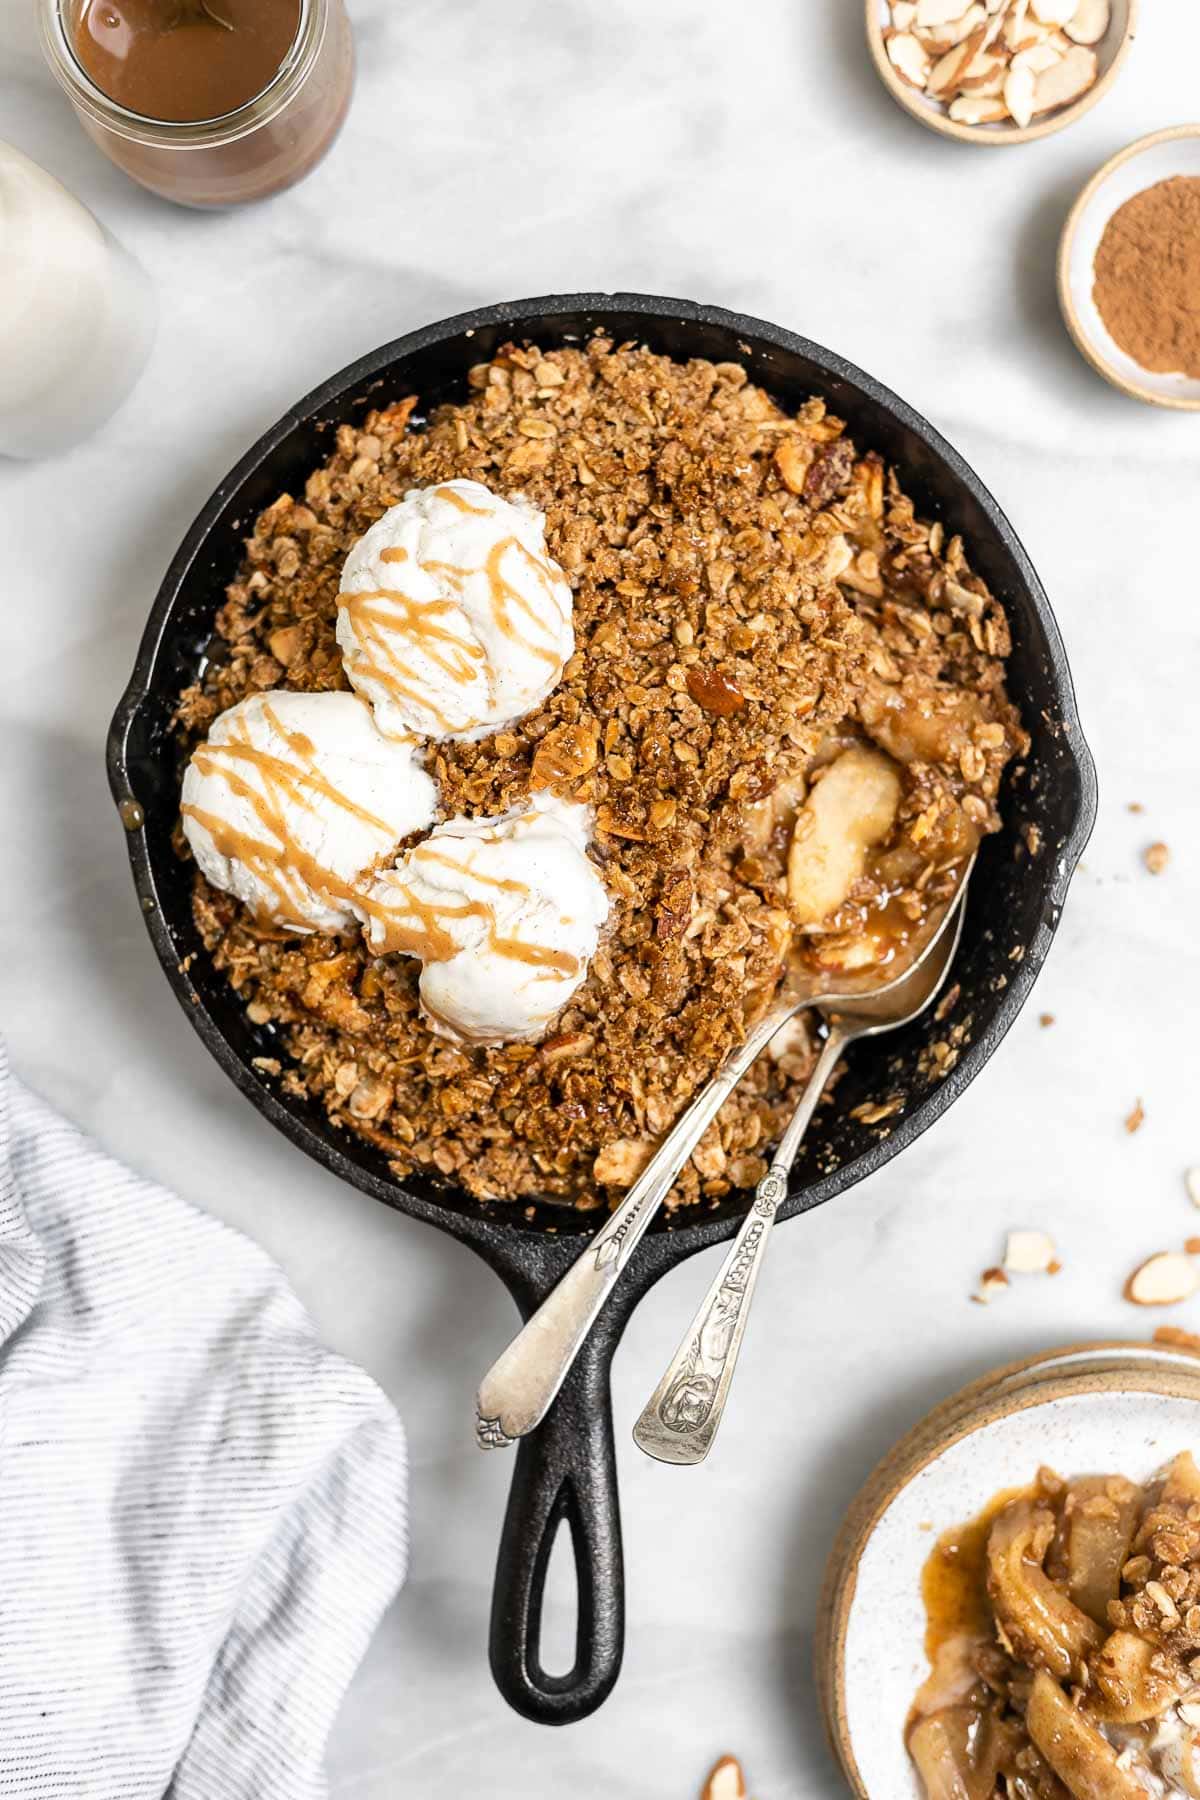 Final recipe in a skillet with two spoons and ice cream on the side.